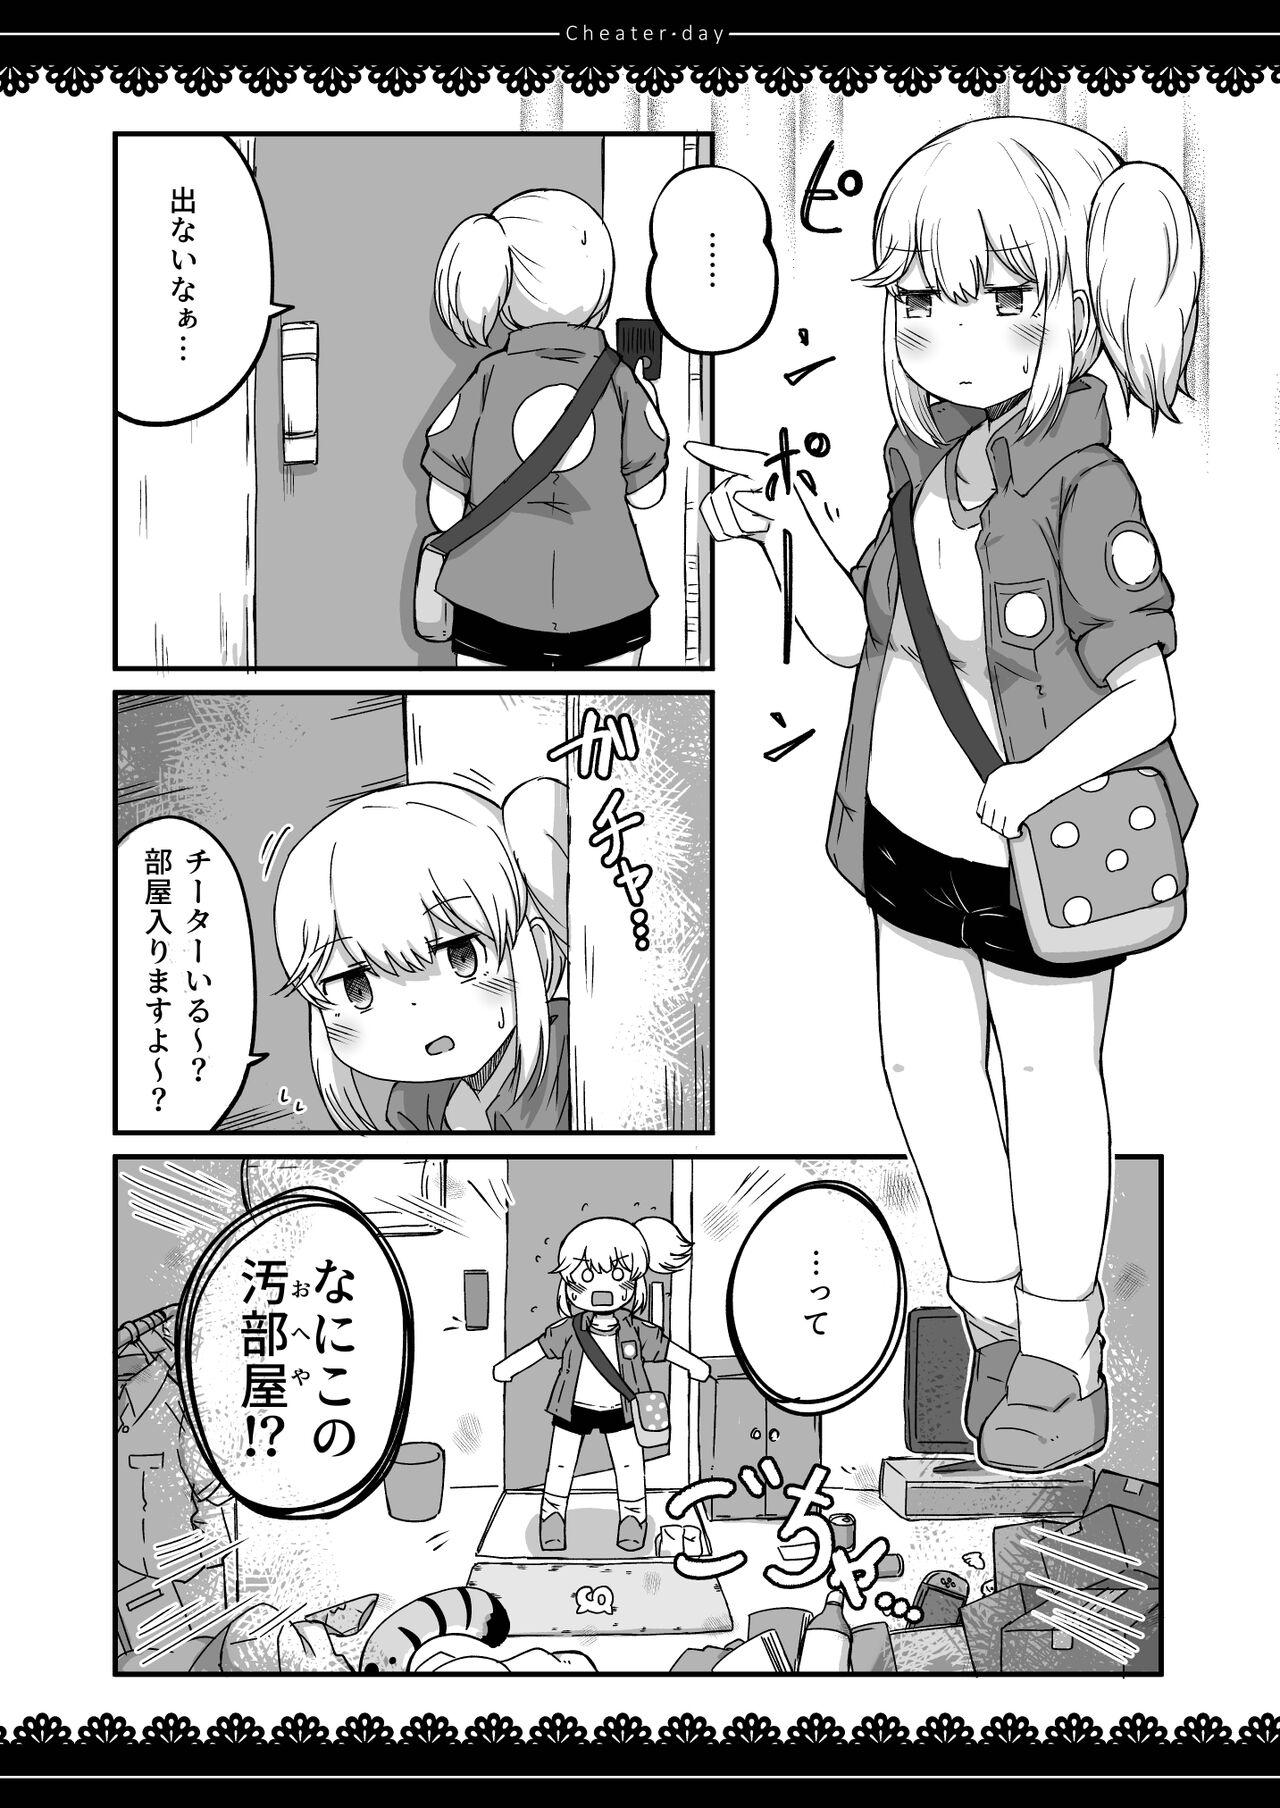 Master Cheater day - Kemono friends Amateur Teen - Page 6